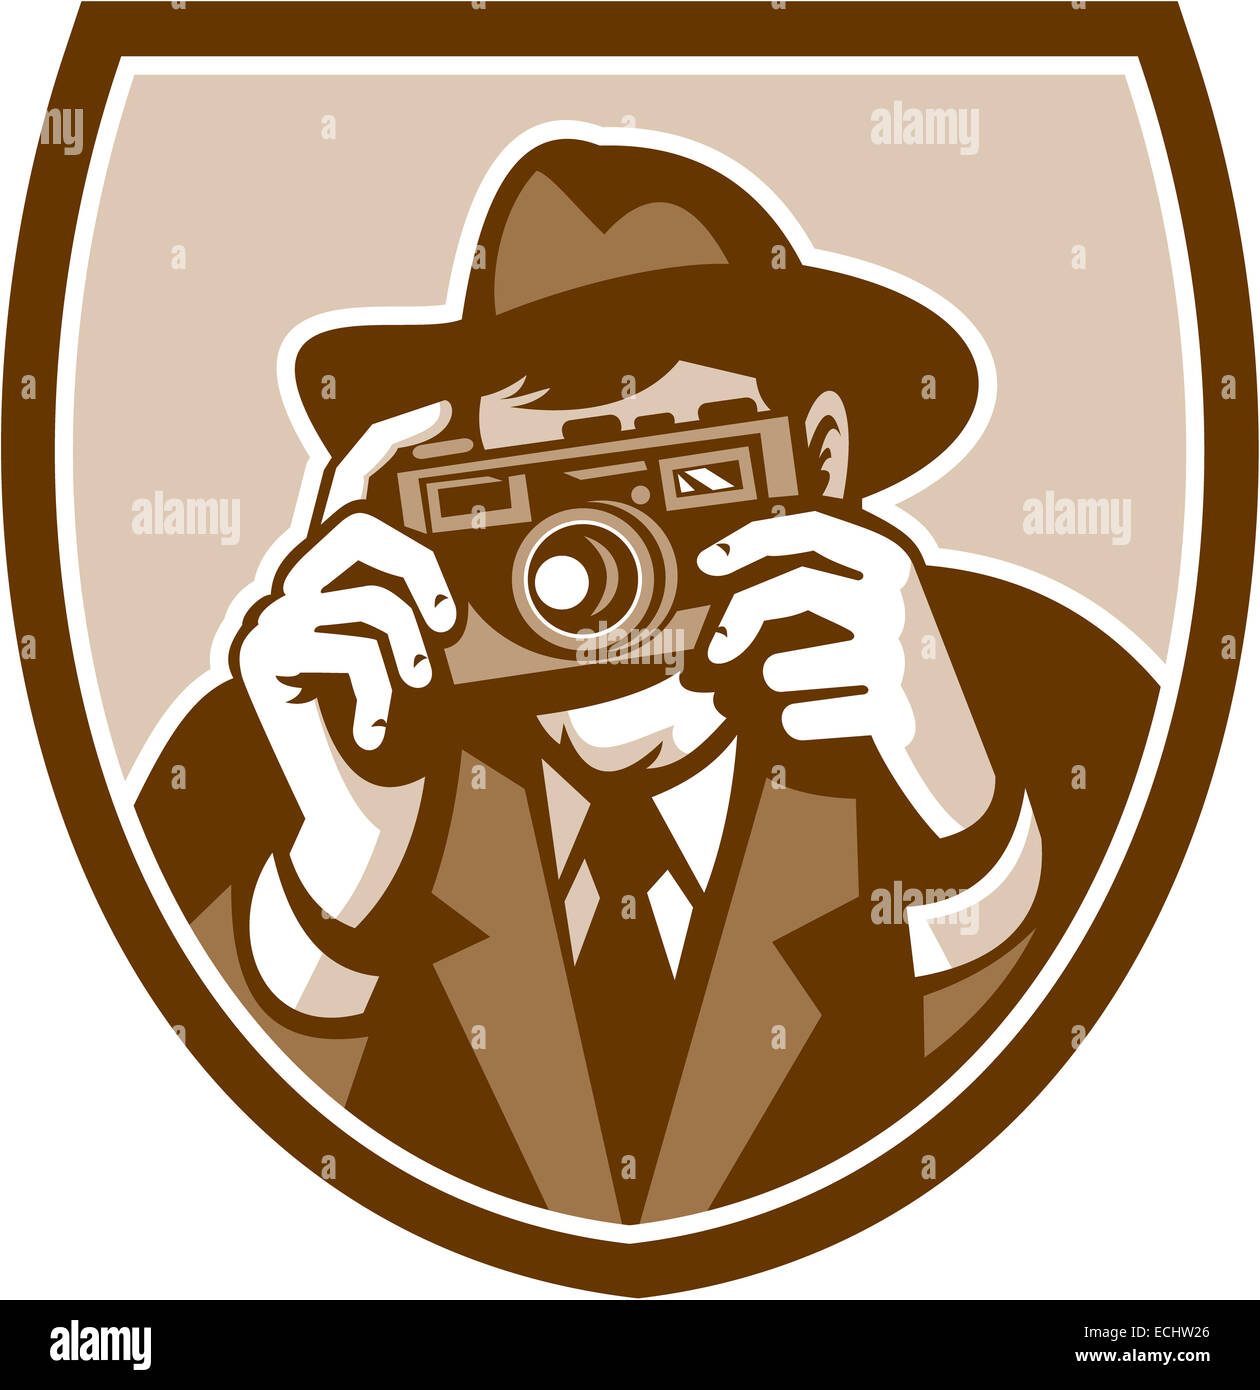 Illustration of a photographer shooting aiming with vintage camera facing front set inside shield crest on isolated background done in retro style. Stock Photo